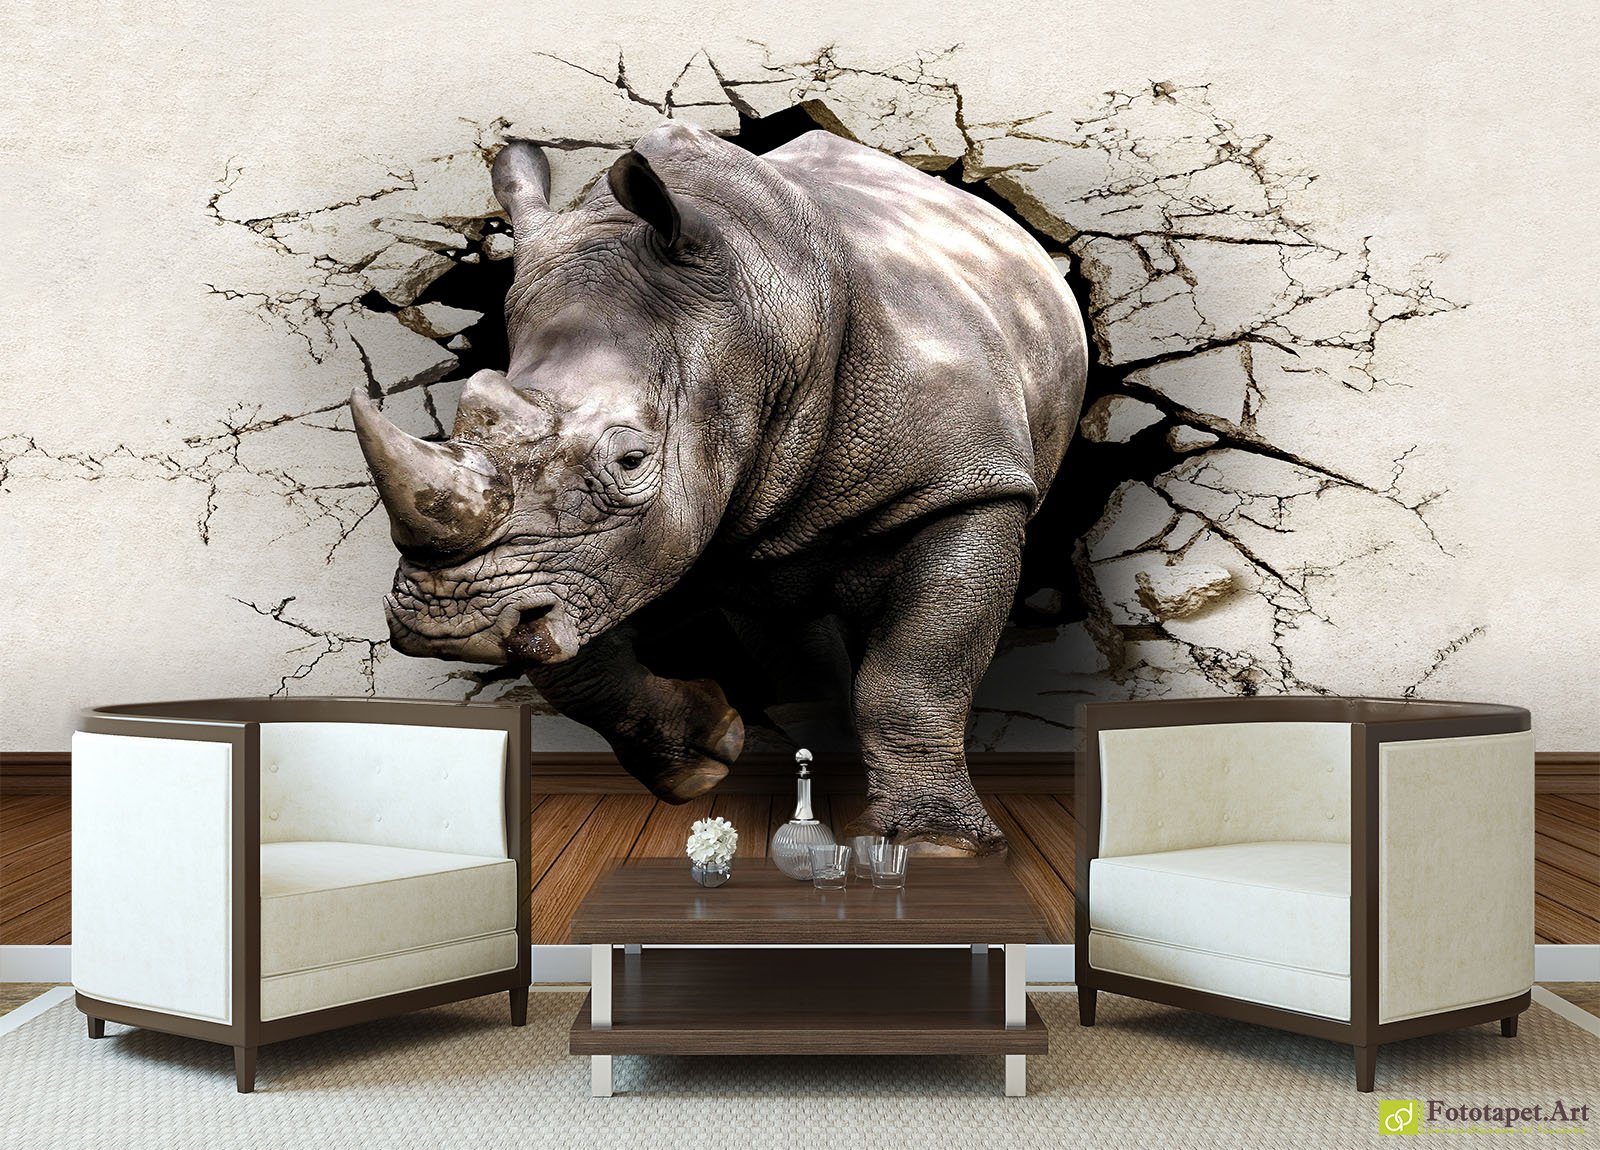 Photo wallpaper Wall Murals - Rhinoceros  Guaranteed for 5  years, printed using the latest HP® Latex Printing Technology, this wall  mural is easy to fit, eco-friendly, non-toxic